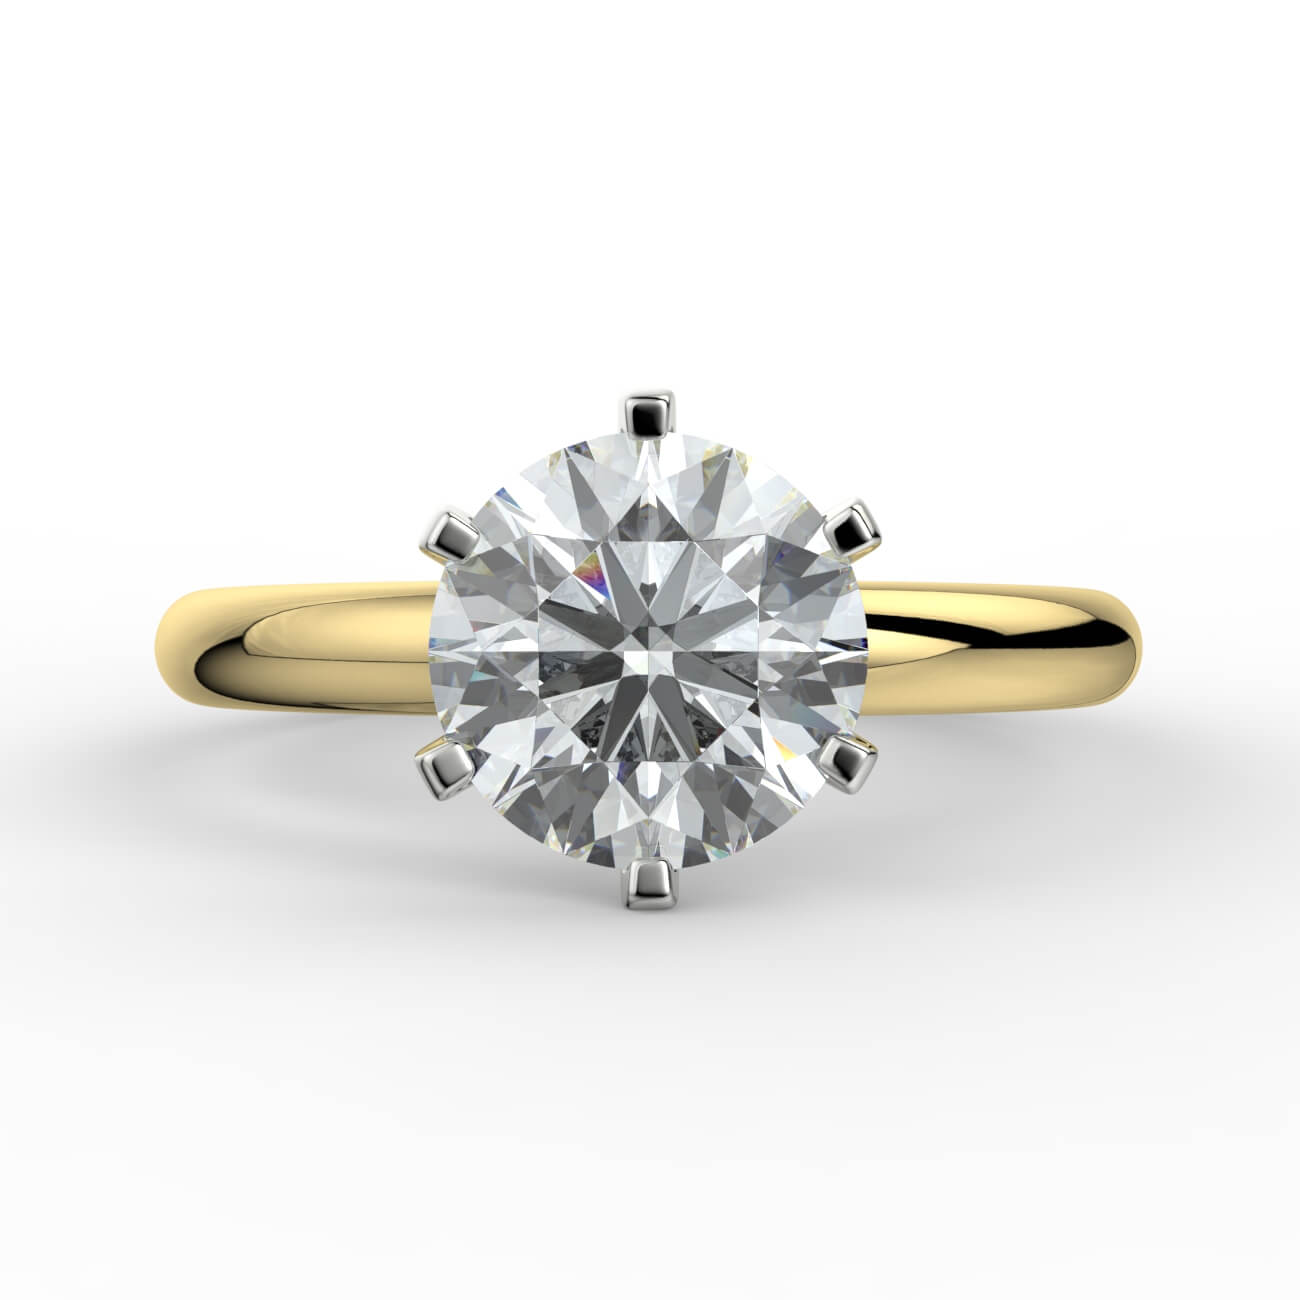 Solitaire diamond engagement ring in white and yellow gold – Australian Diamond Network